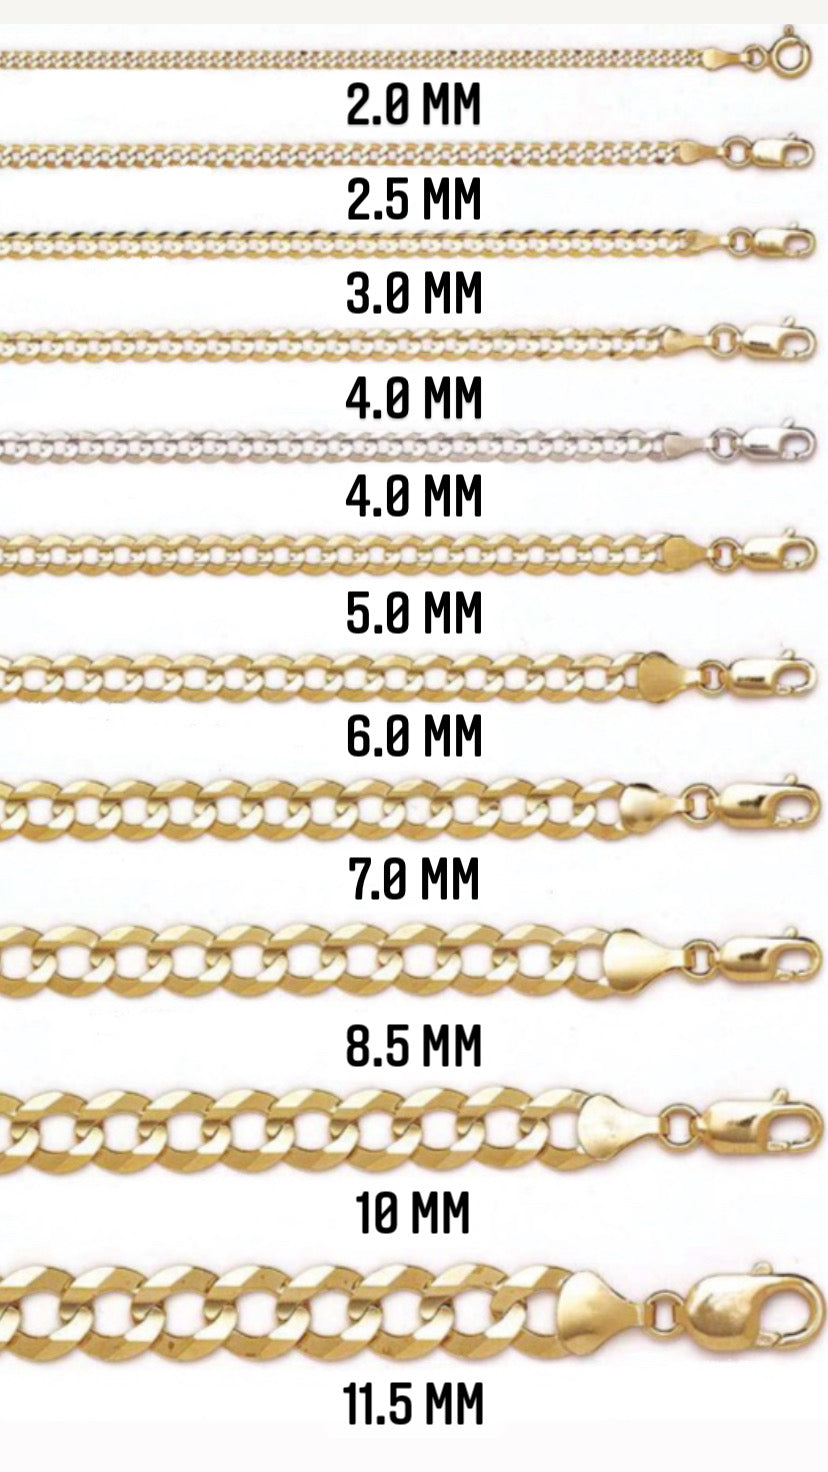 14K Gold- Hollow Box Chain (Rose Gold)